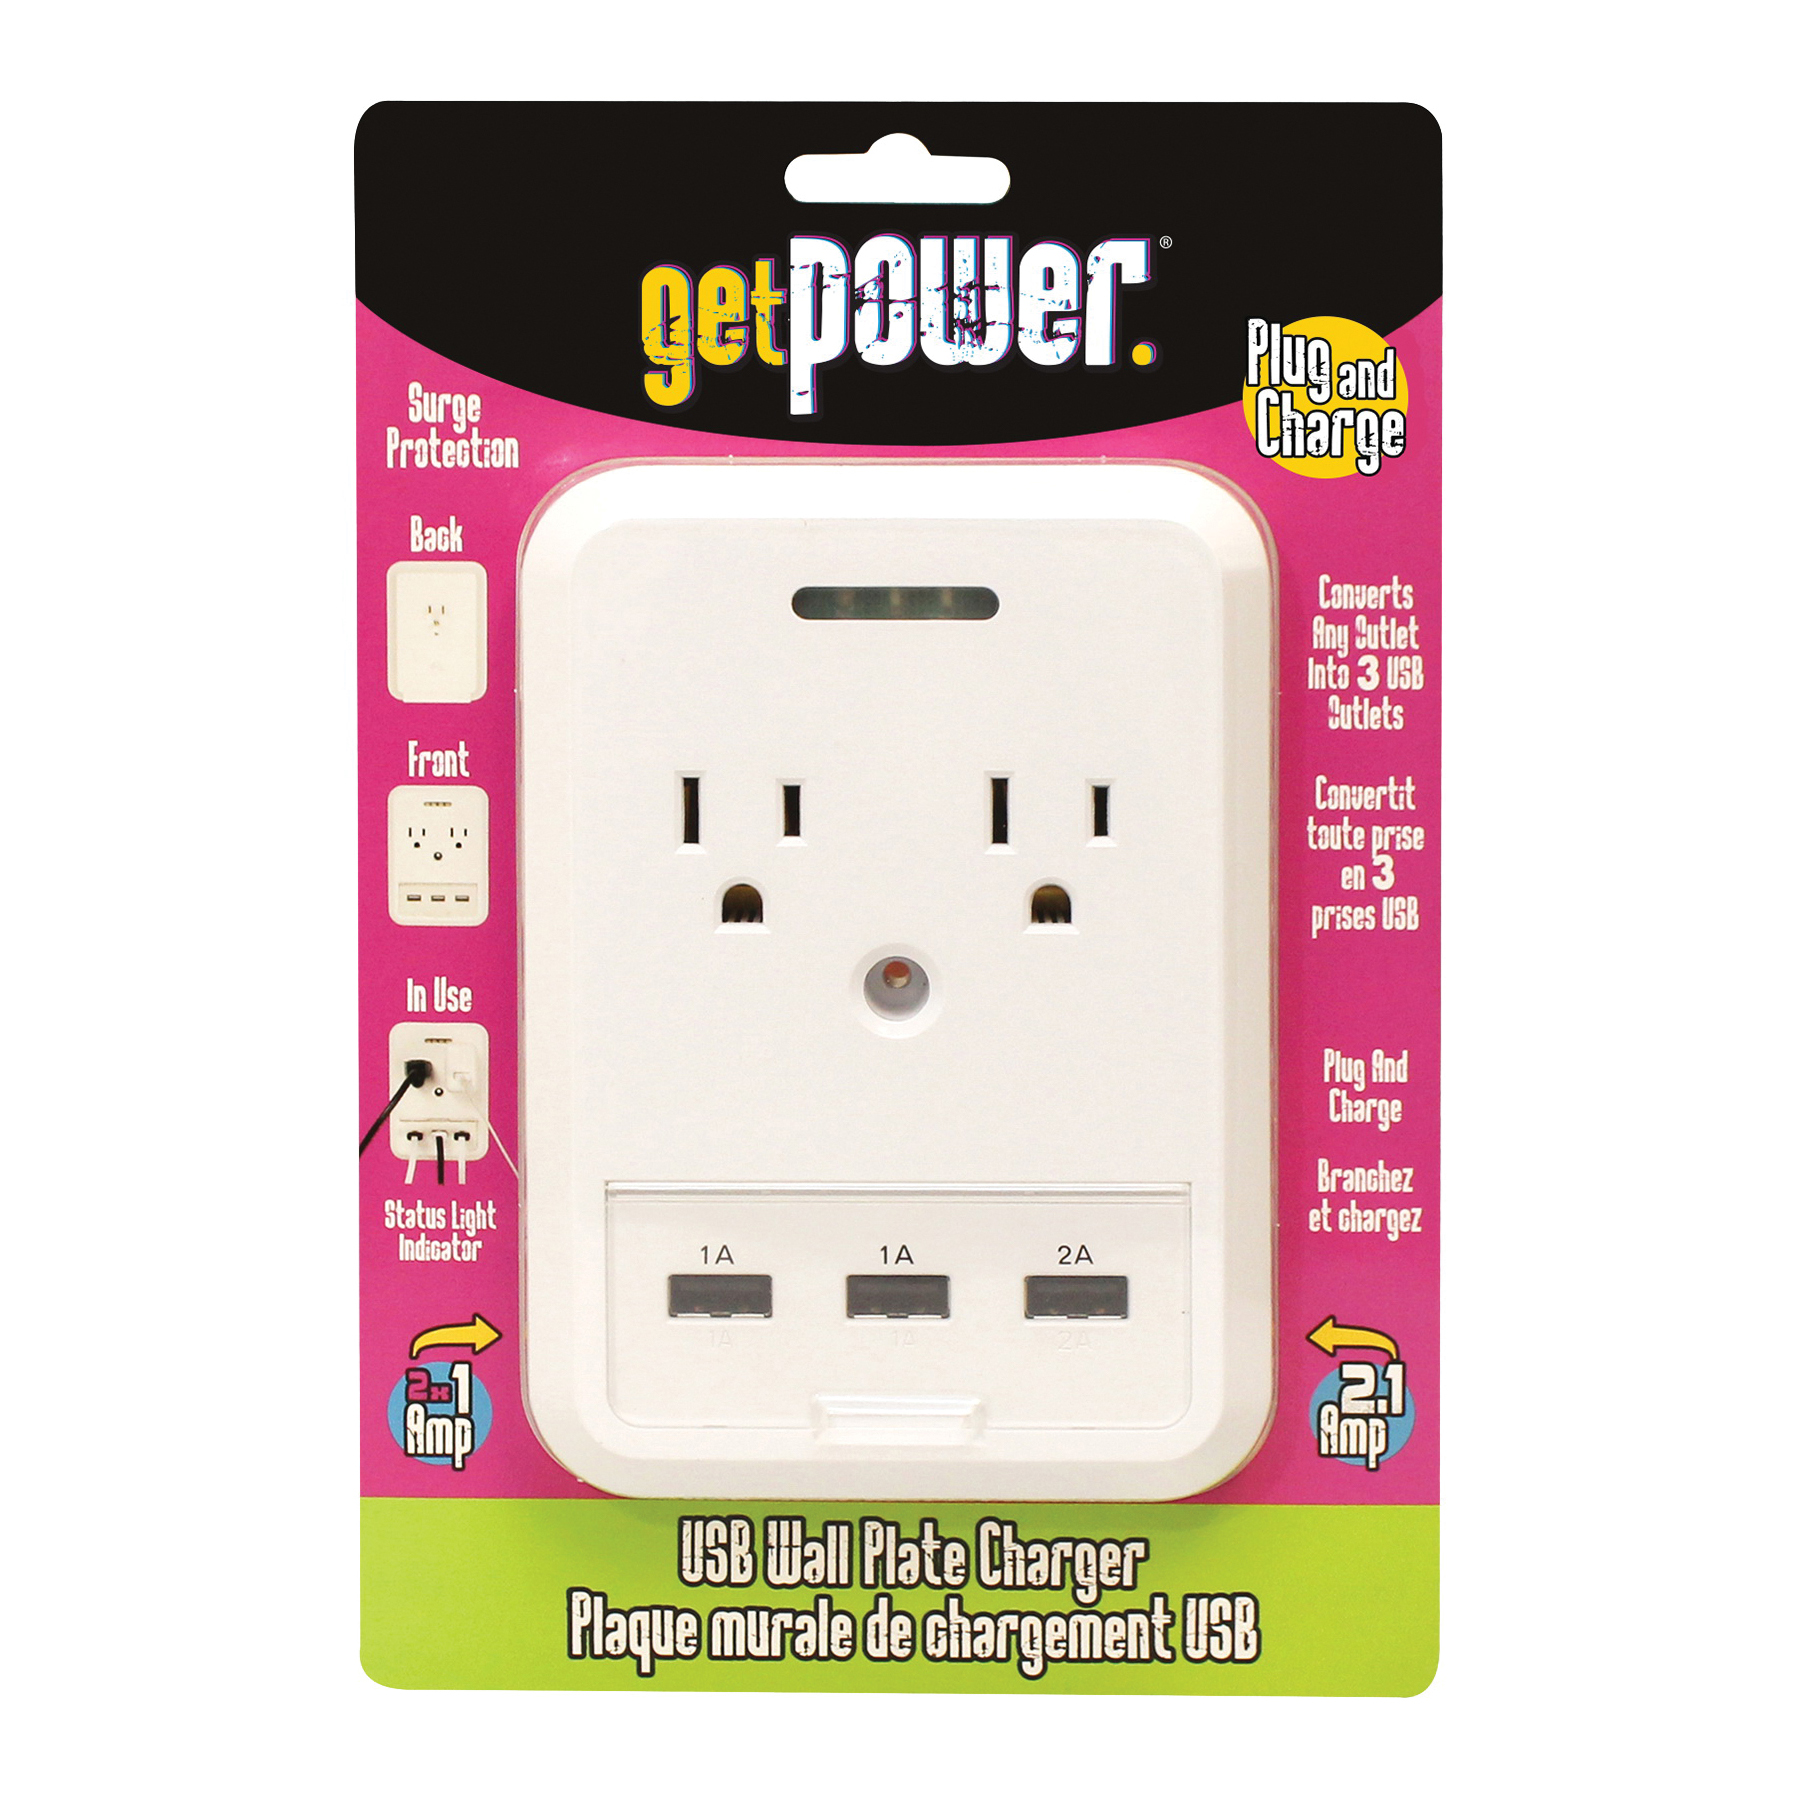 GP-3USB-AC-AC USB Wallplate Charger, 4.1 A, 5 -Outlet, White